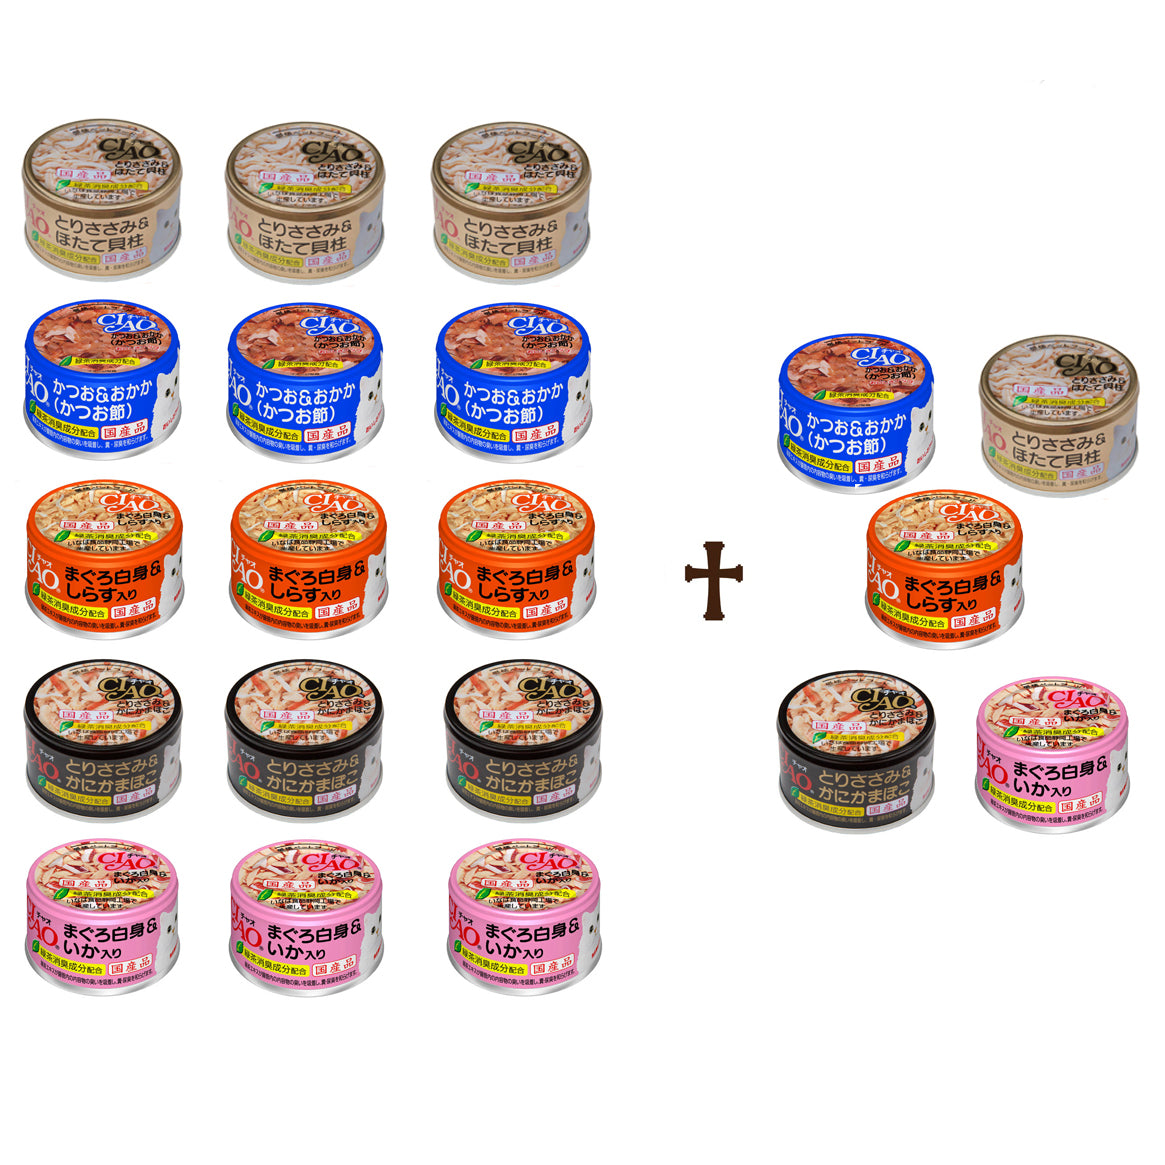 CIAO Canned Jelly Wet Food Buy 15 Get 5 for Free